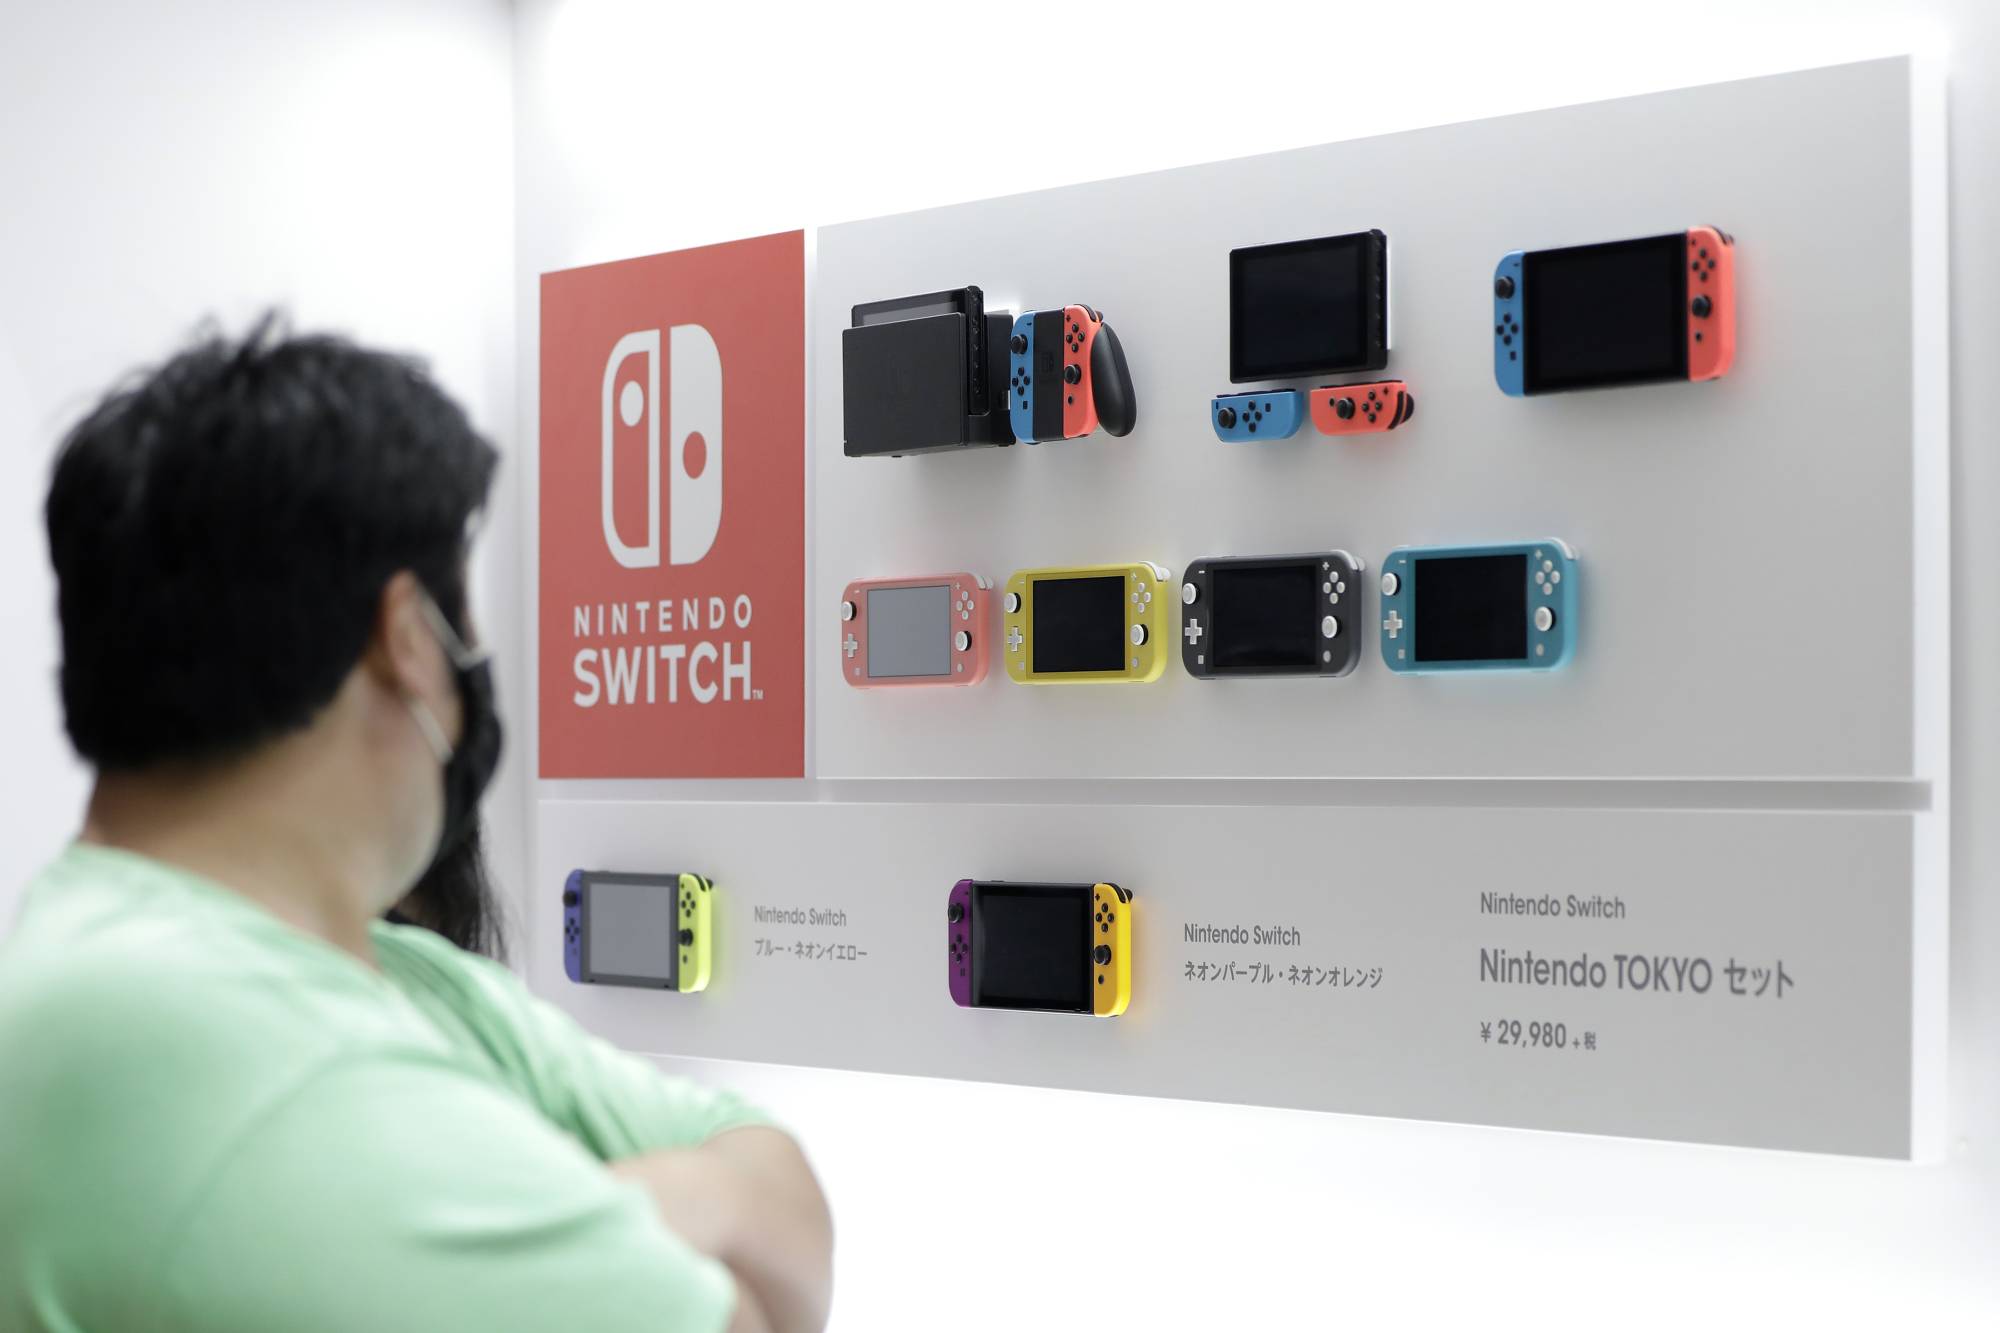 Nintendo plans upgraded Switch console and major games for 2021 The